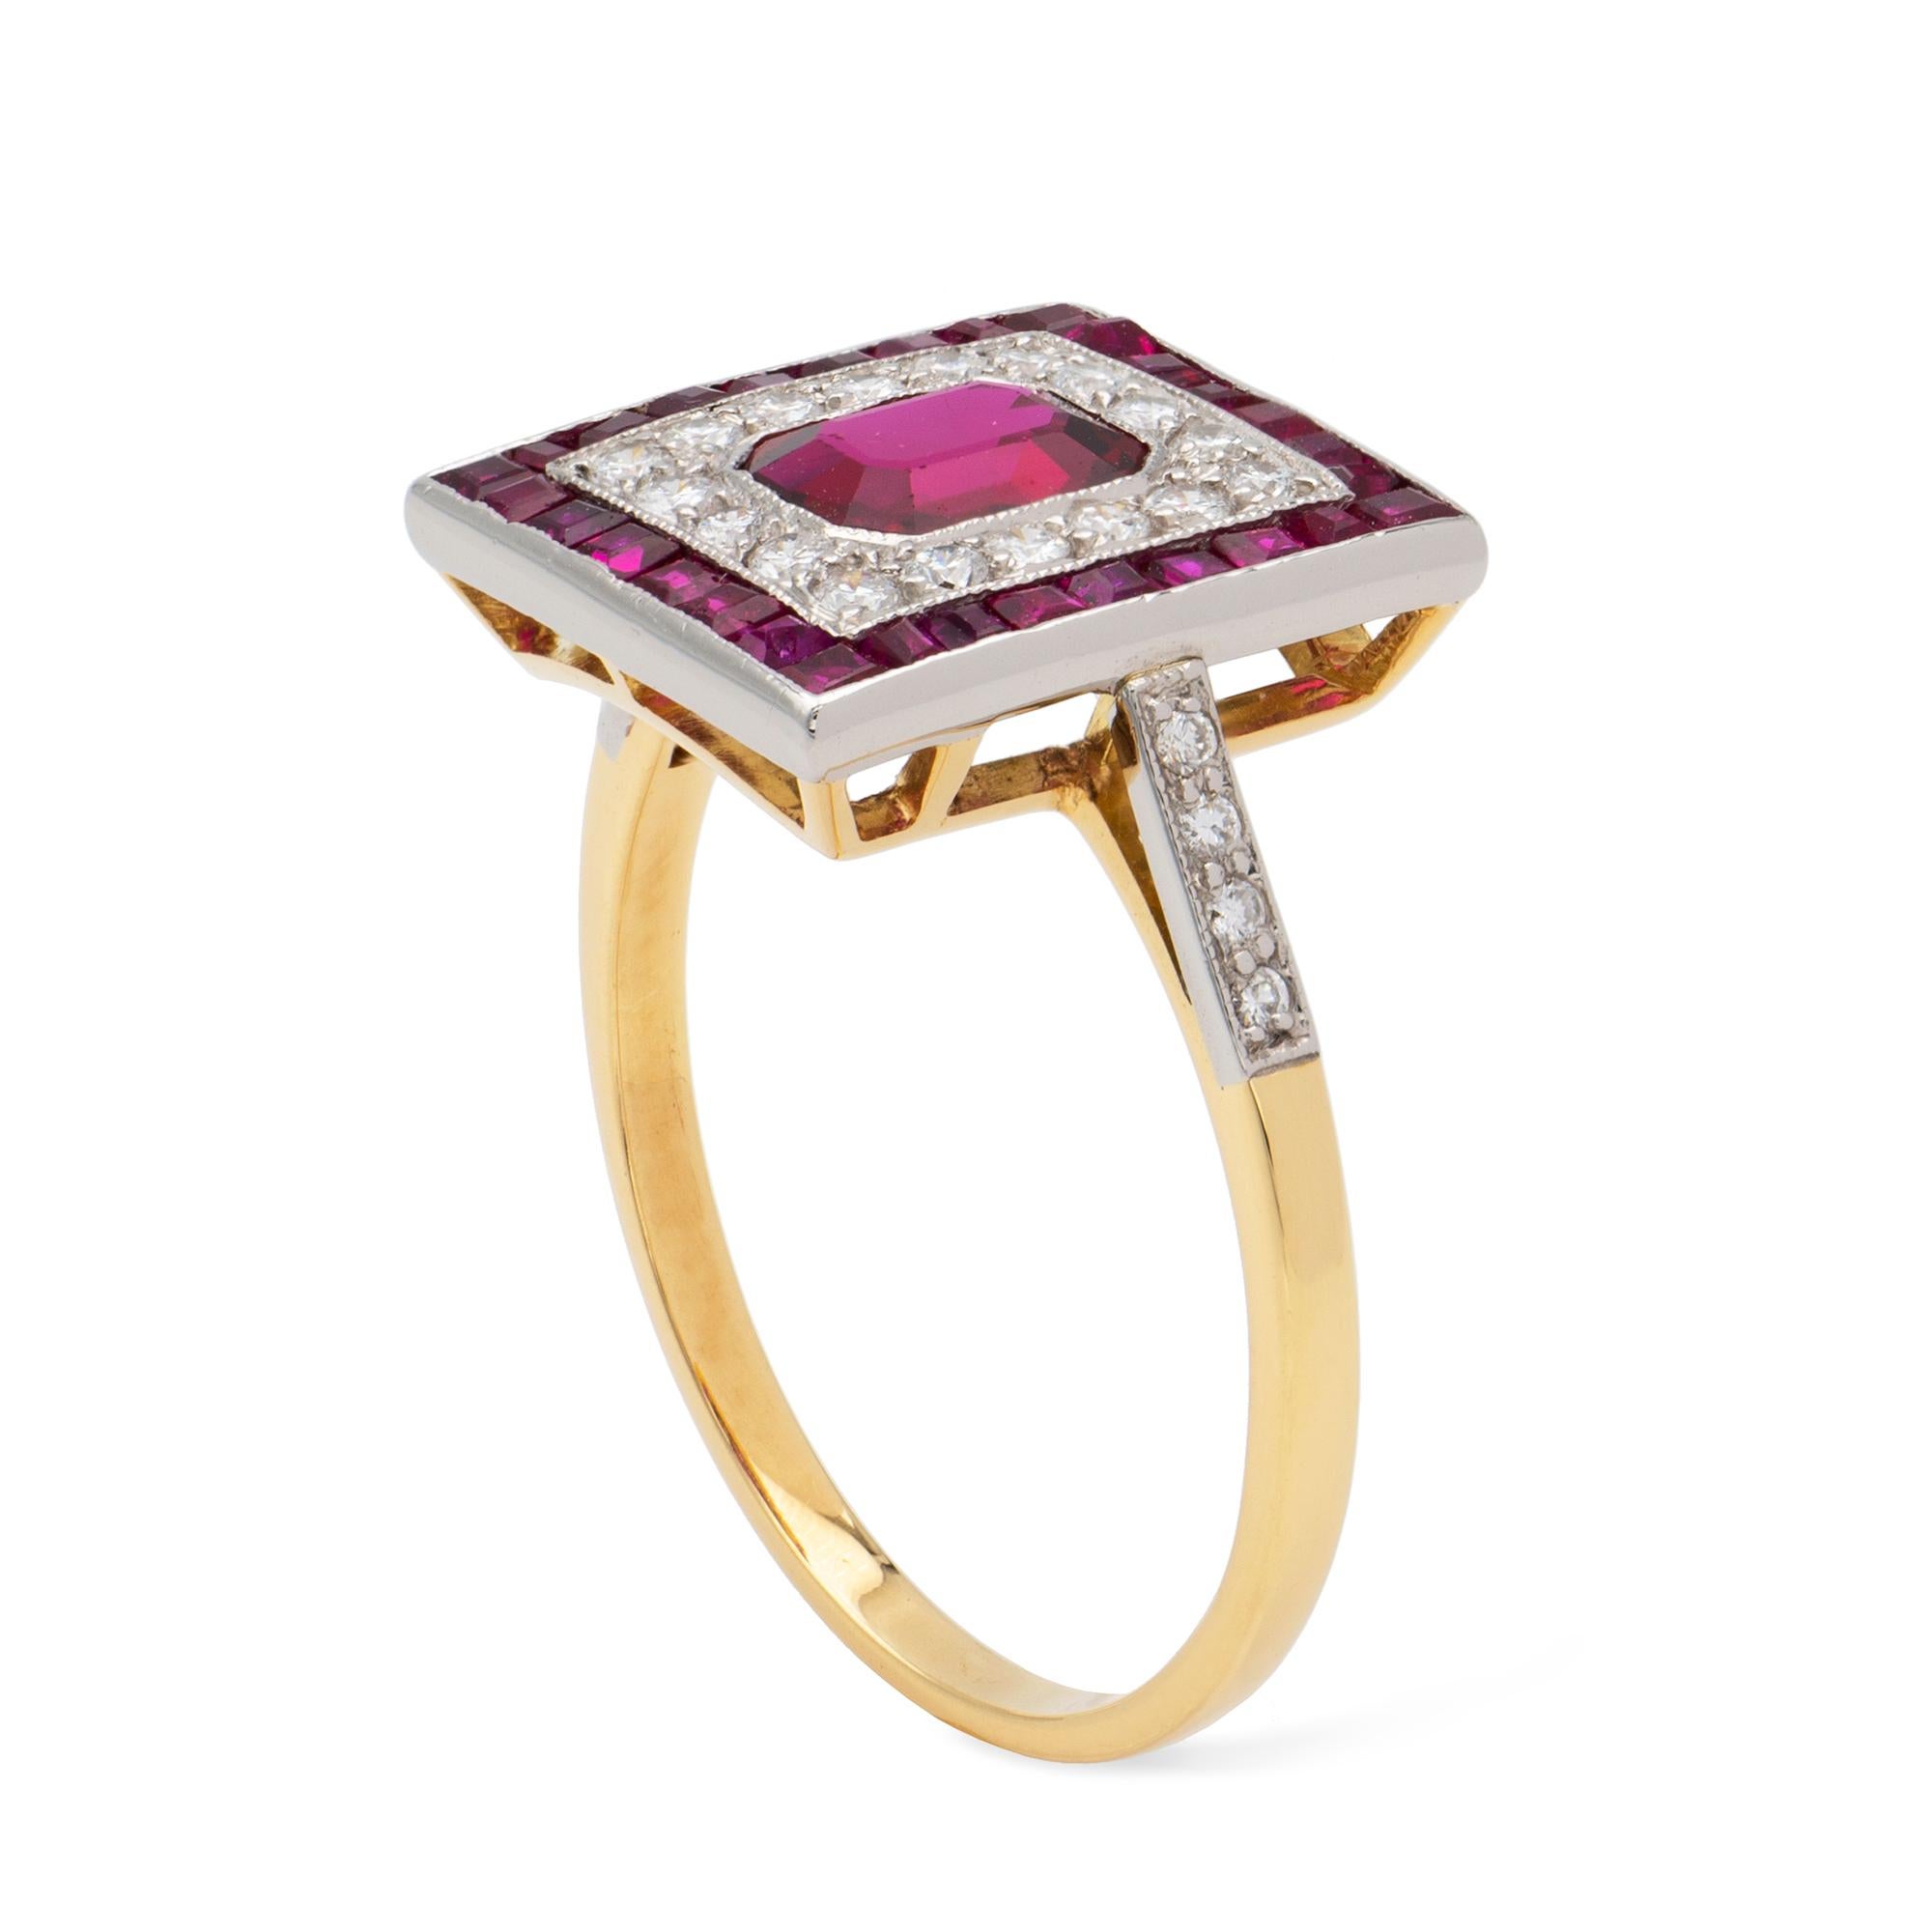 An Art Deco style ruby and diamond square cluster ring, the central octagonal-cut ruby estimated to weigh 0.6 carats, surrounded by eighteen round brilliant-cut diamonds estimated to weigh a total of 0.15 carats, all within a border of calibre-cut